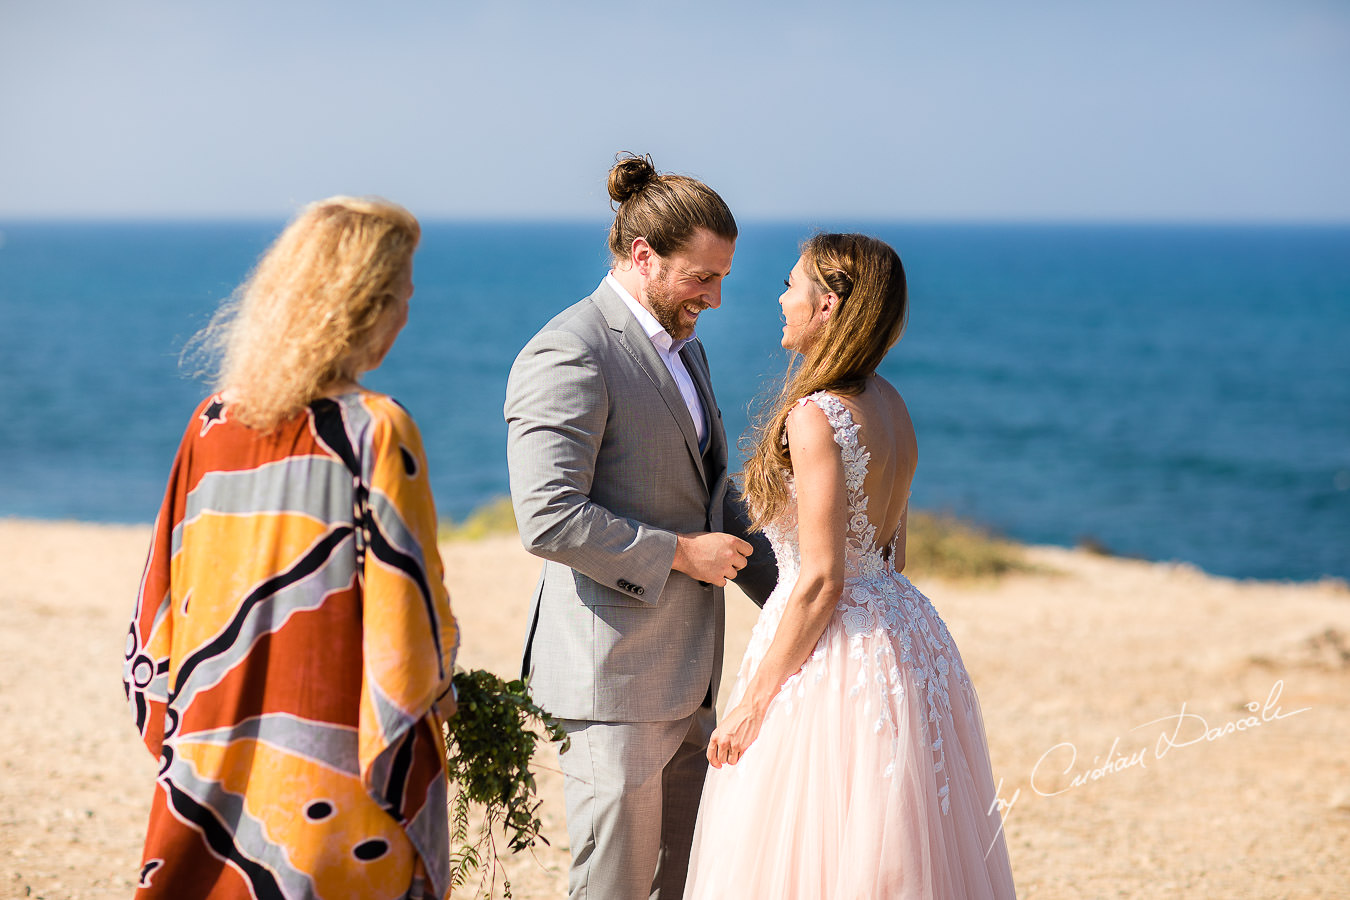 The bride and groom changing vows, moments captured by Cyprus Wedding Photographer Cristian Dascalu.